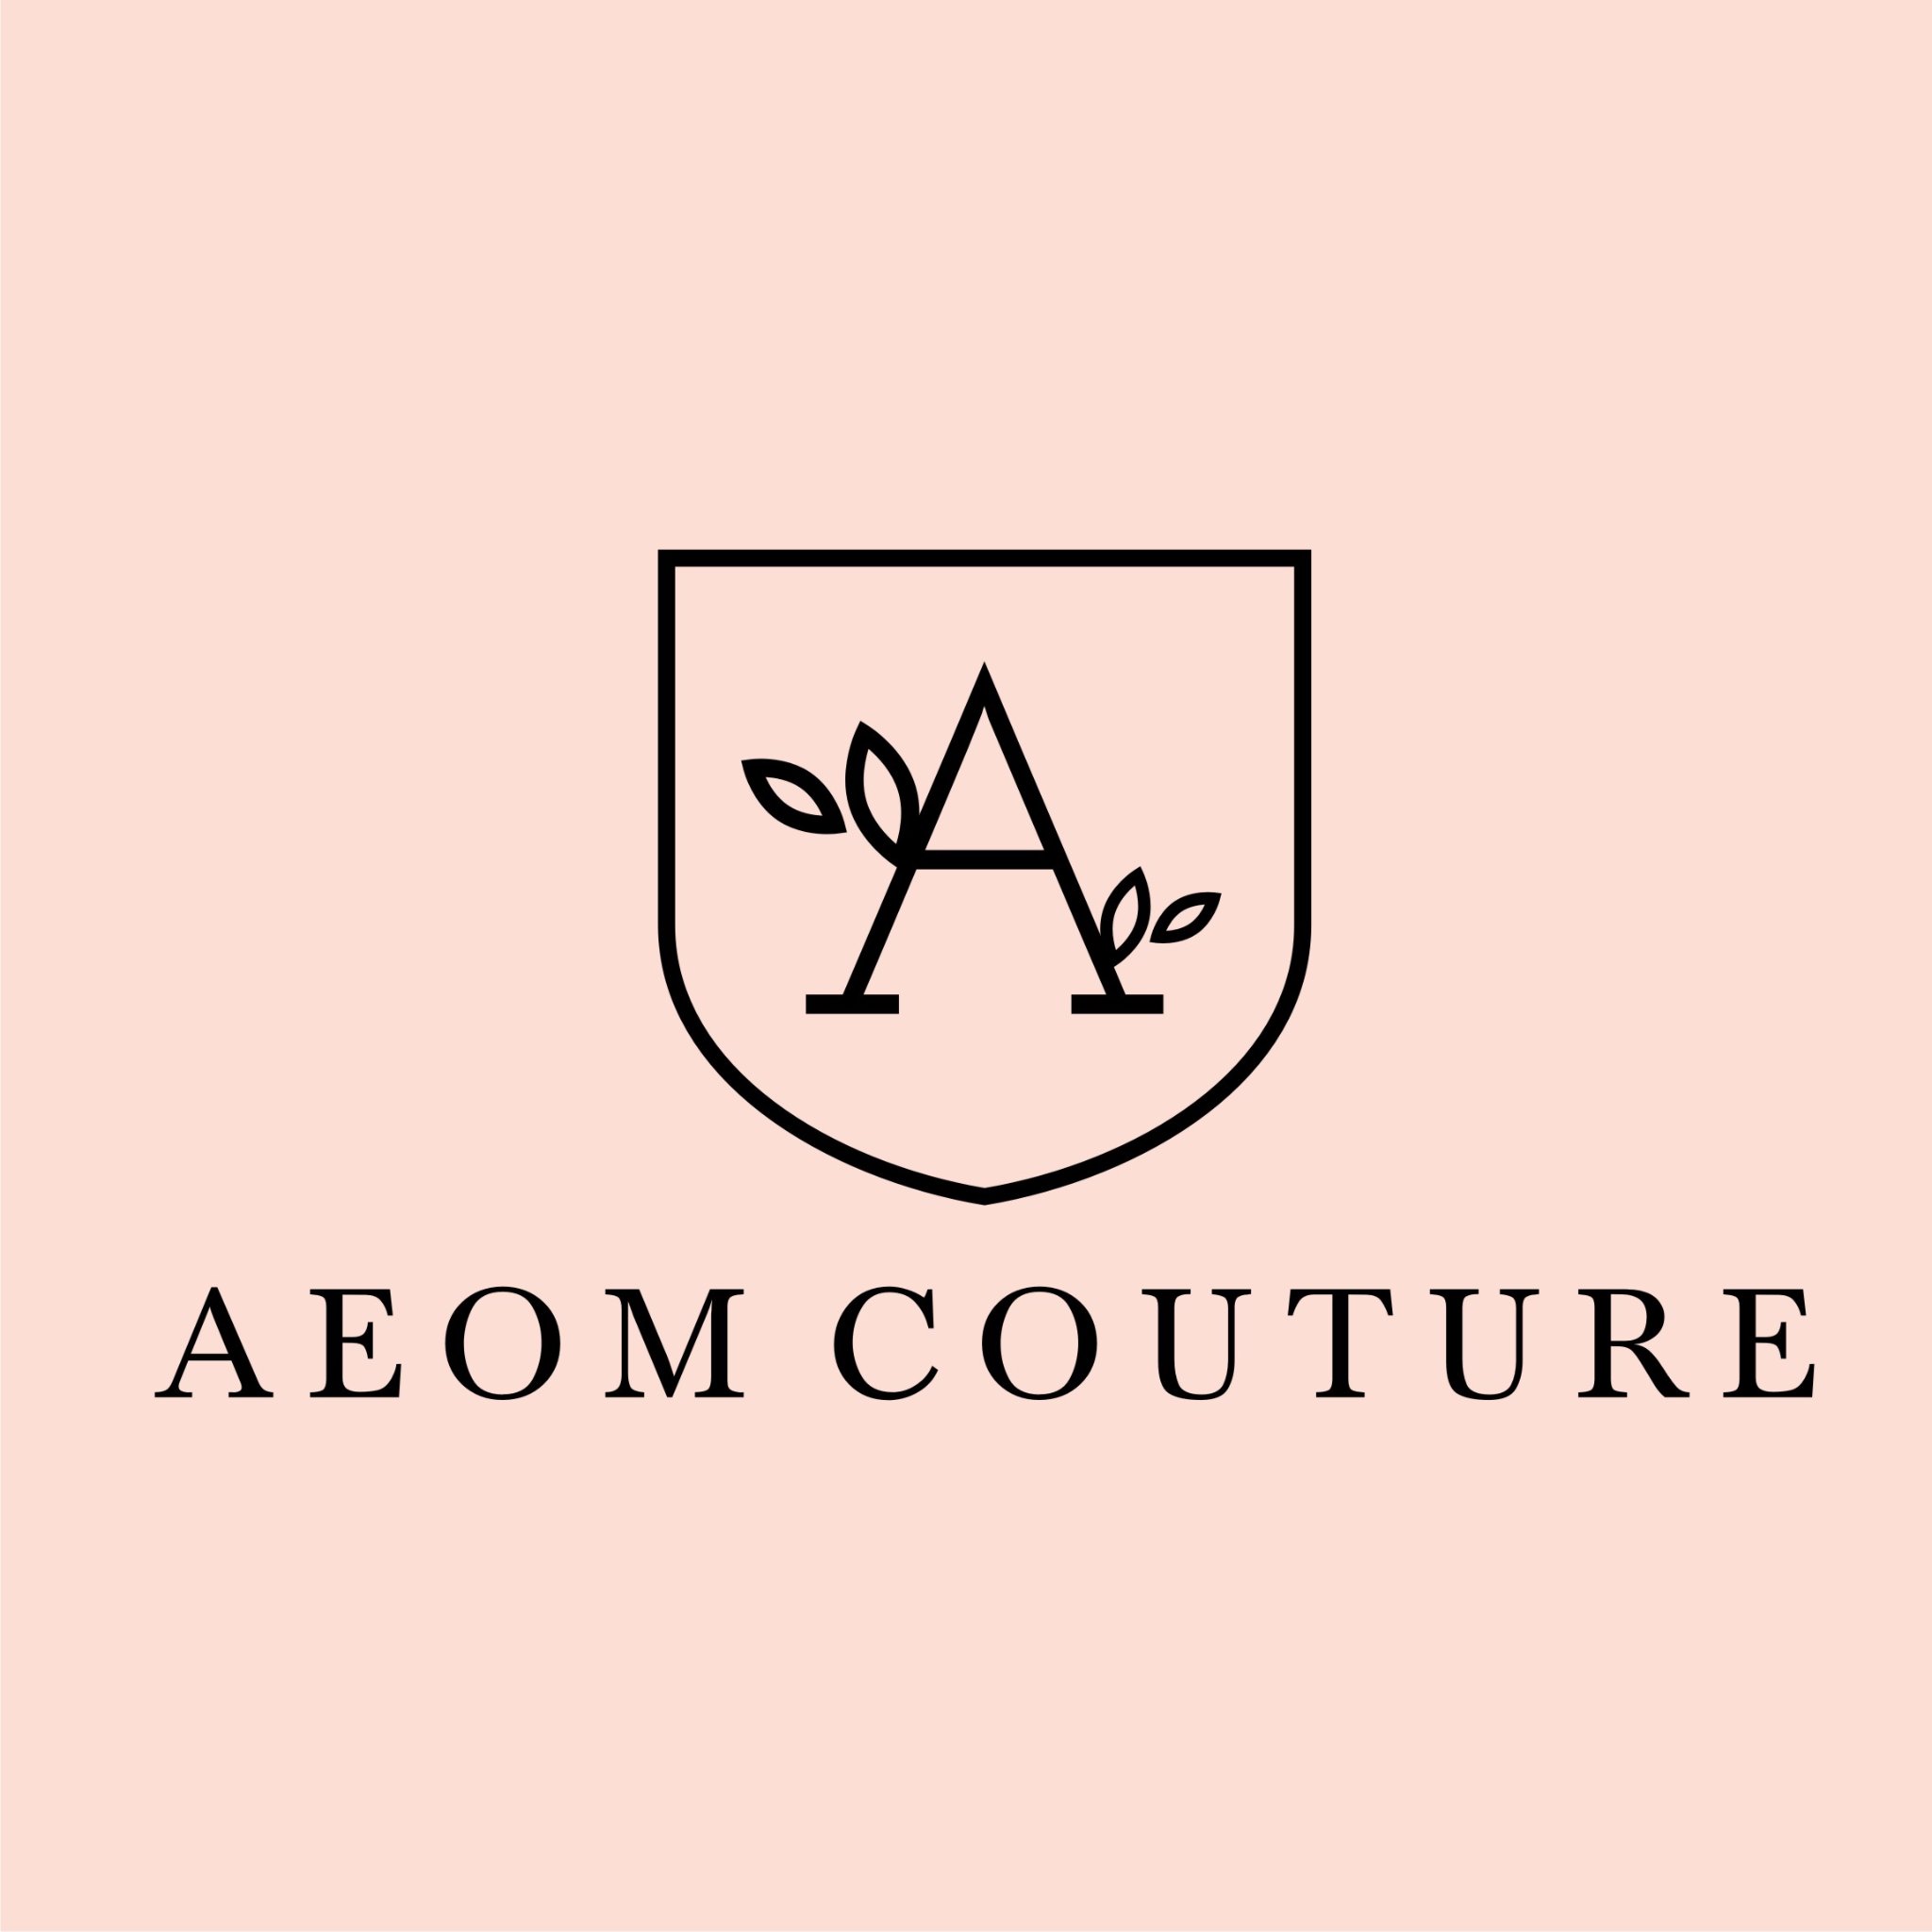 AEOM stands for All Eyes On Me!
Clothing meant for the fashion forward, independent and confident women of today -an achiever who has all eyes on her